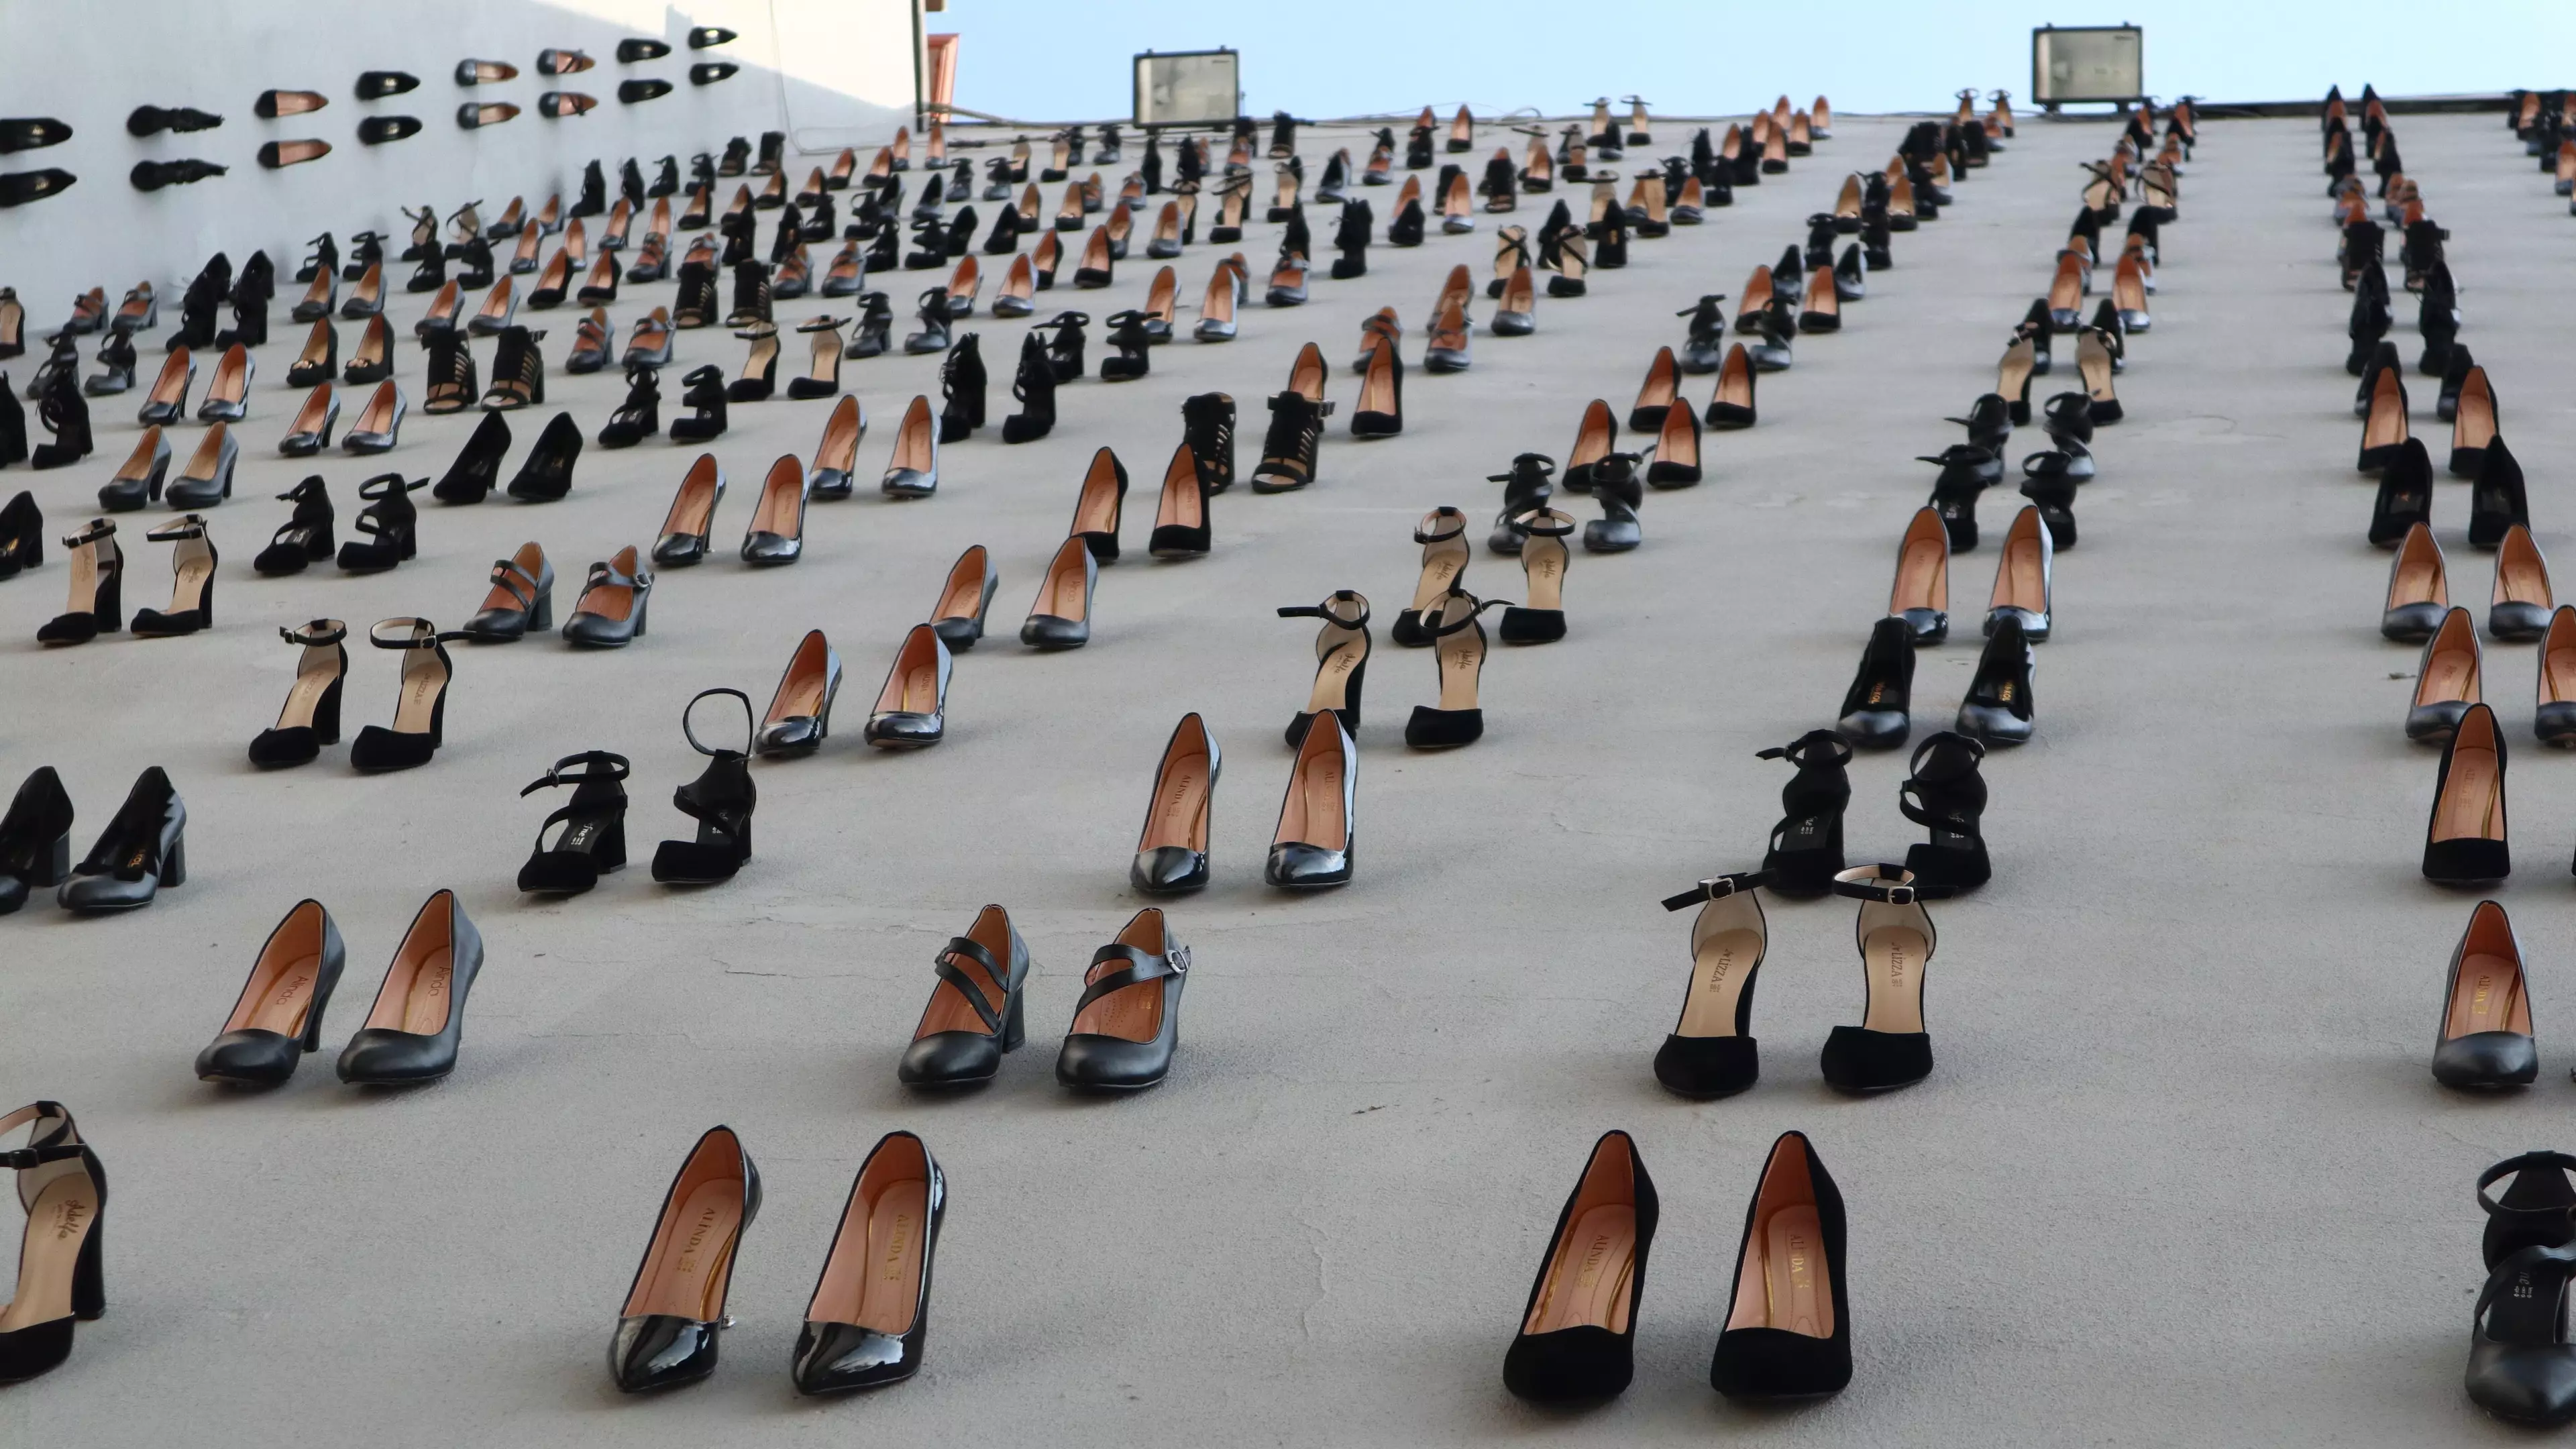 Artist Hangs 440 Shoes Off Building To Show How Many Women Were Killed By Their Husbands